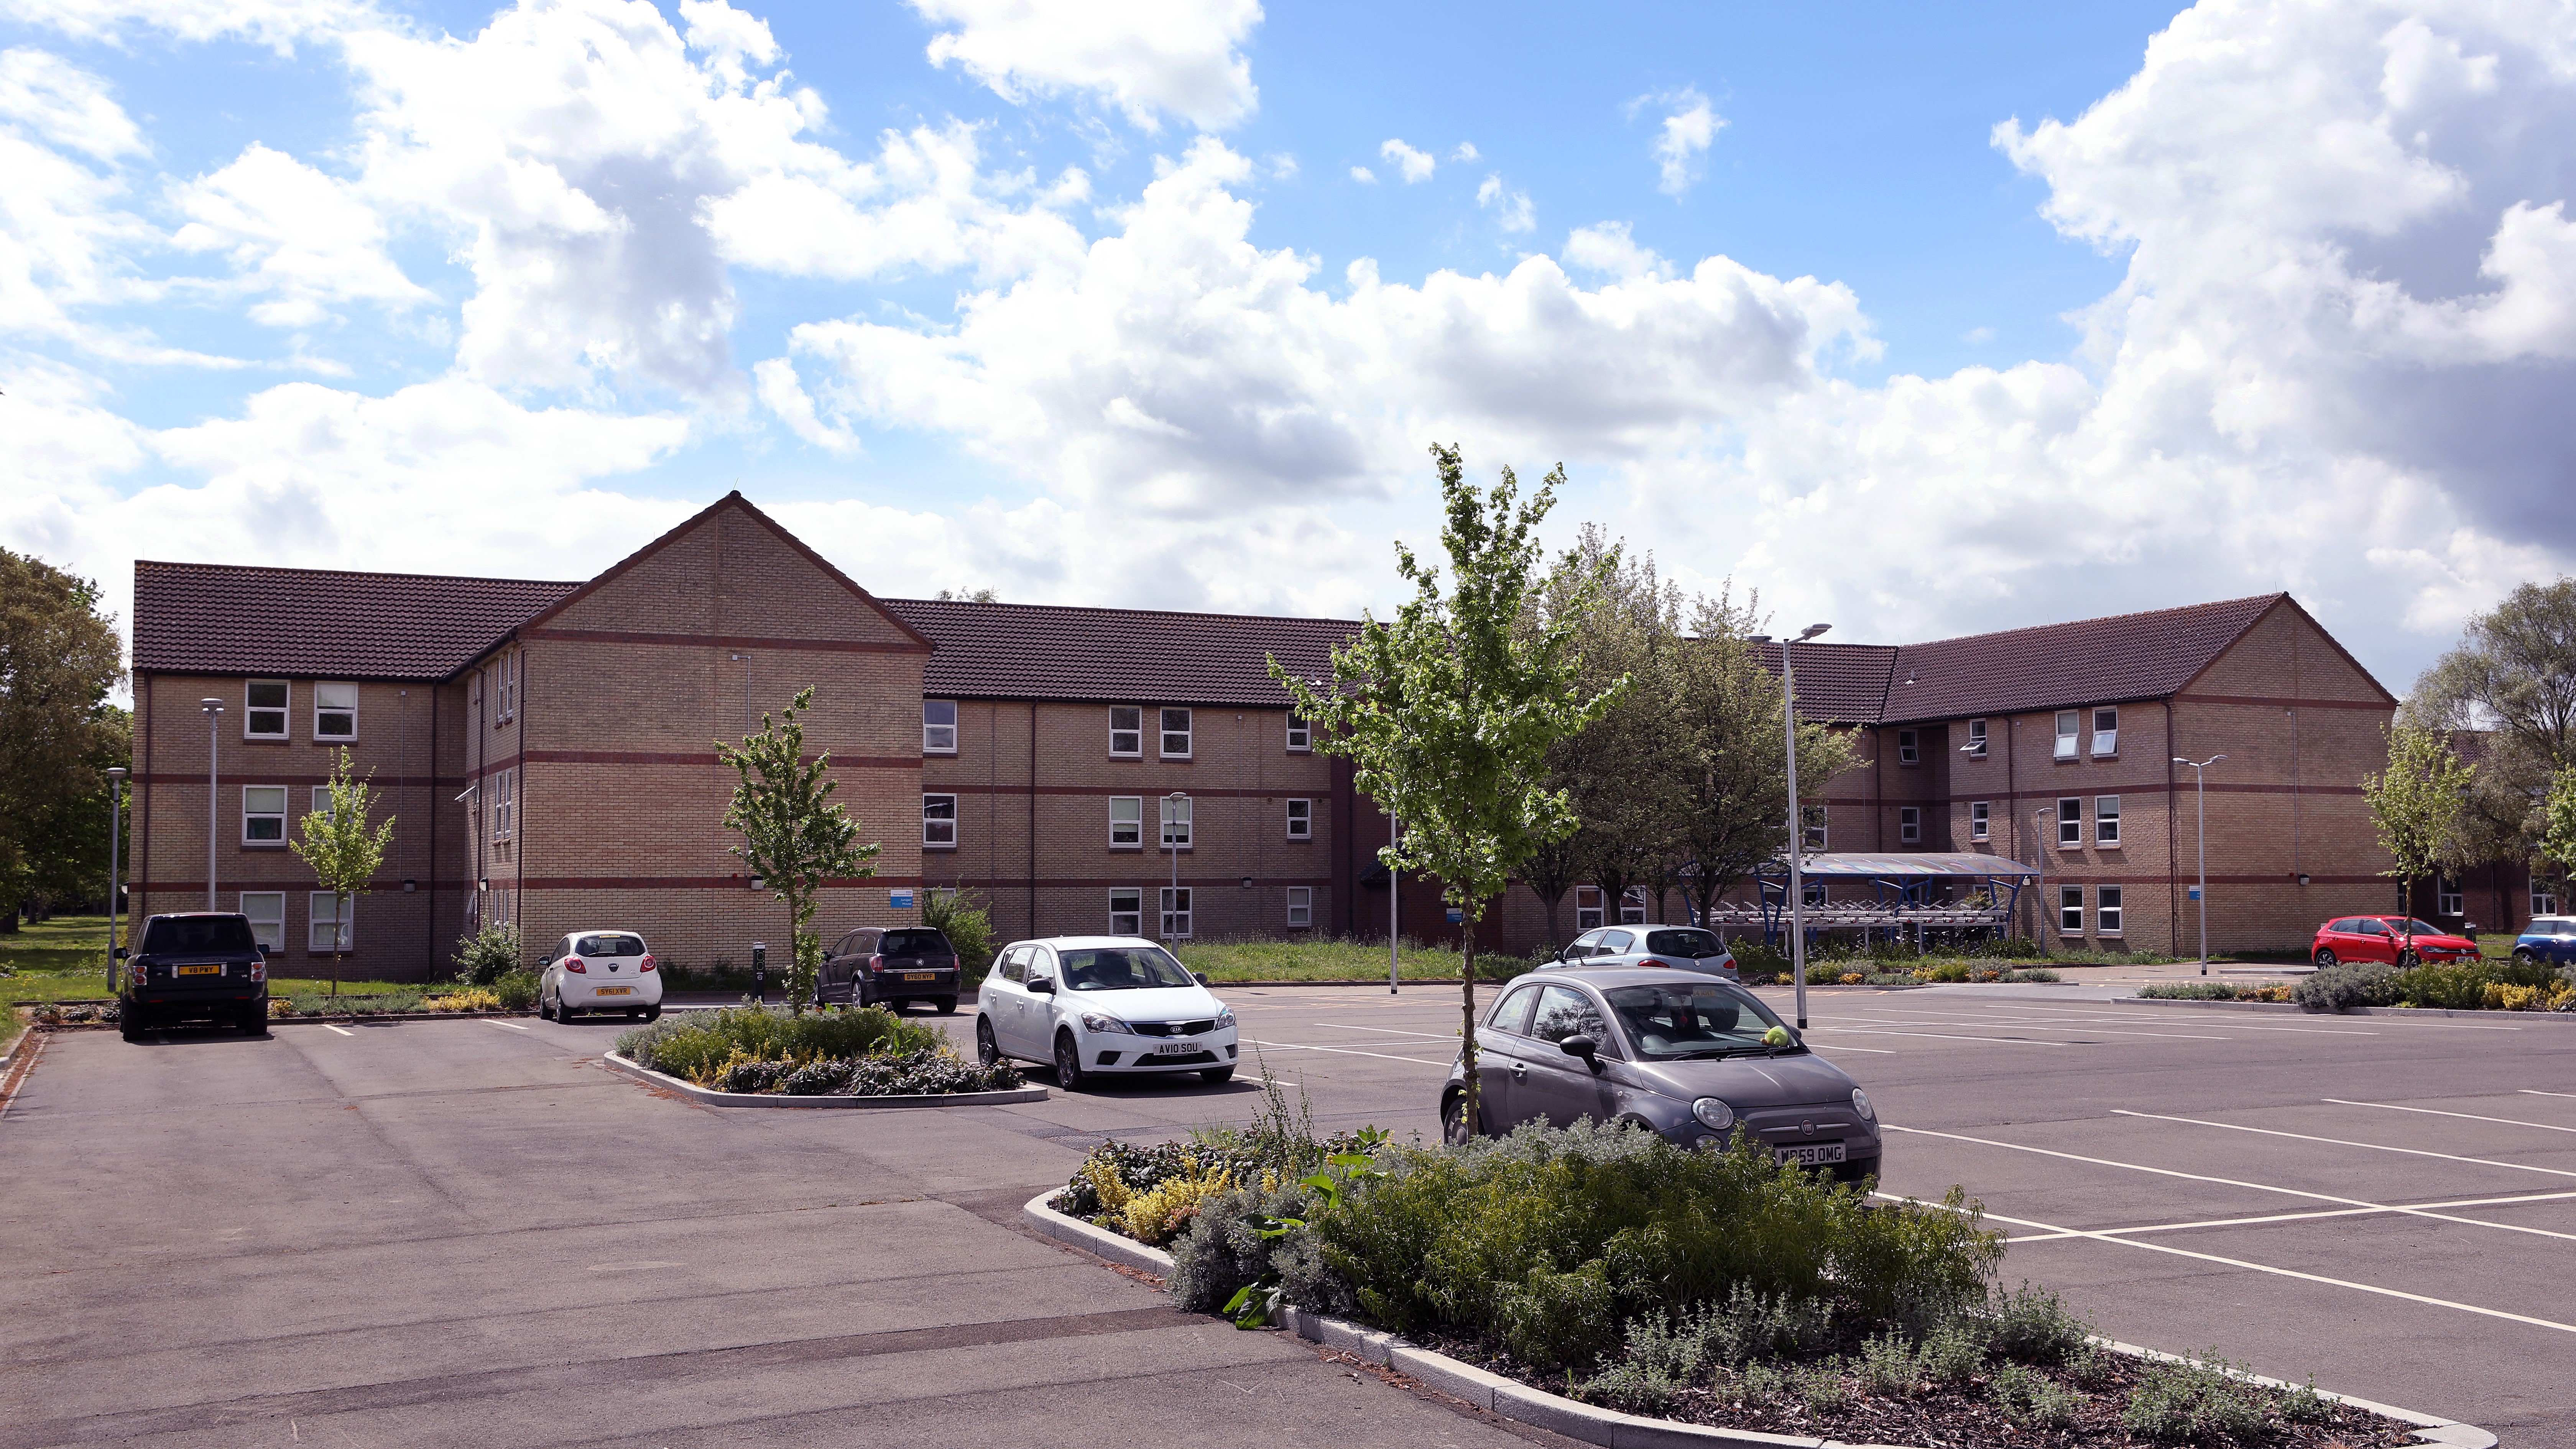 Investment sale of refurbished 235 bed NHS keyworker accommodation blocks located north of Cambridge.